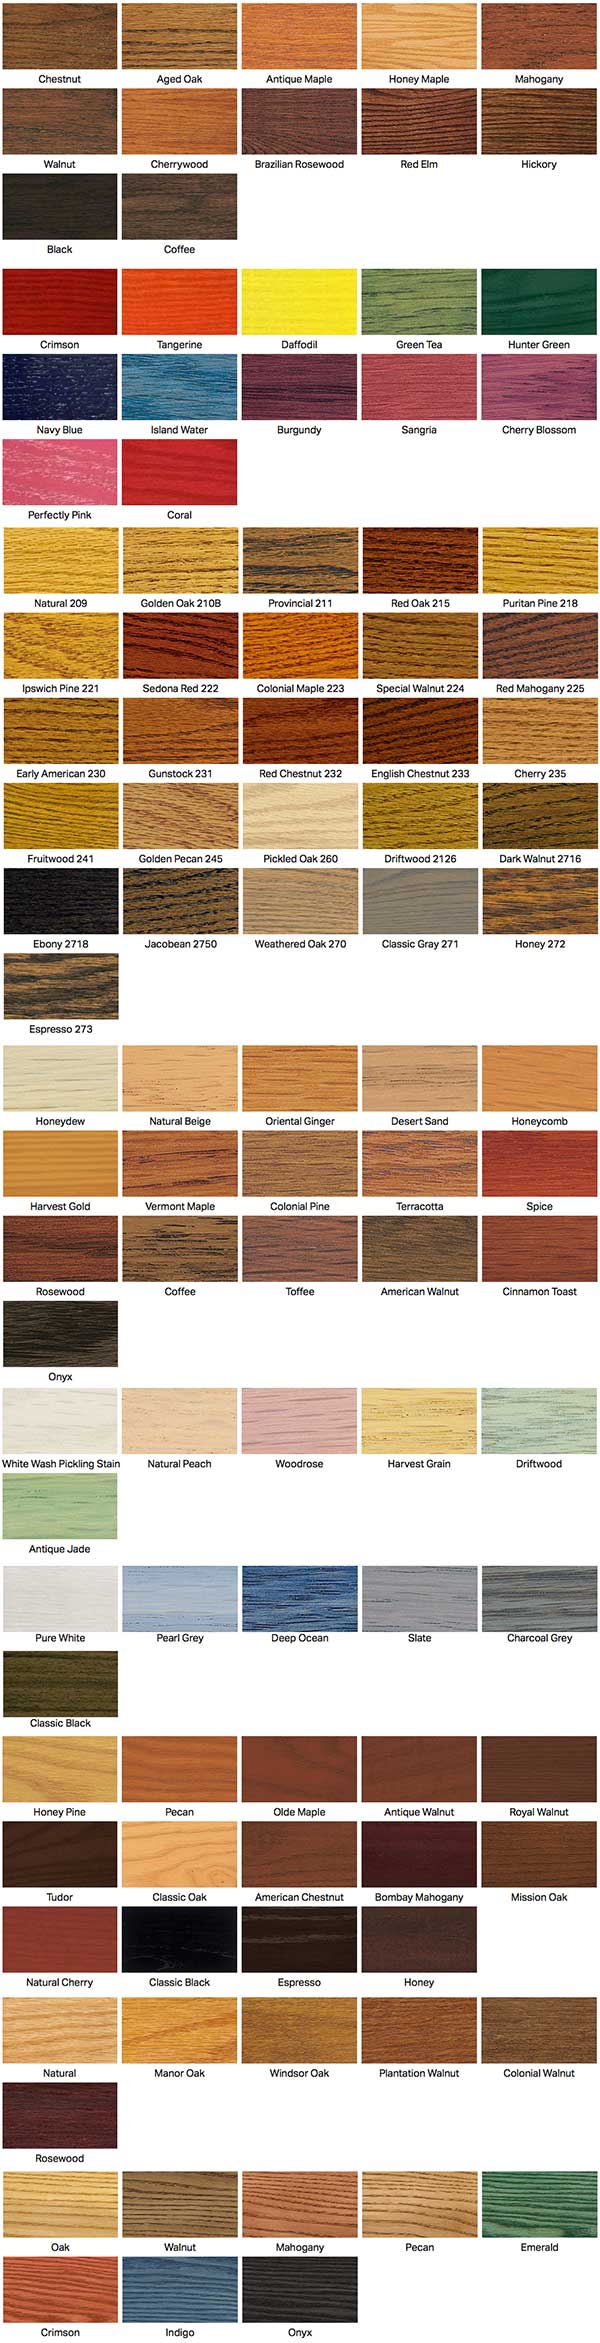 wood floor stain colors from Minwax by Indianapolis hardwood floor service